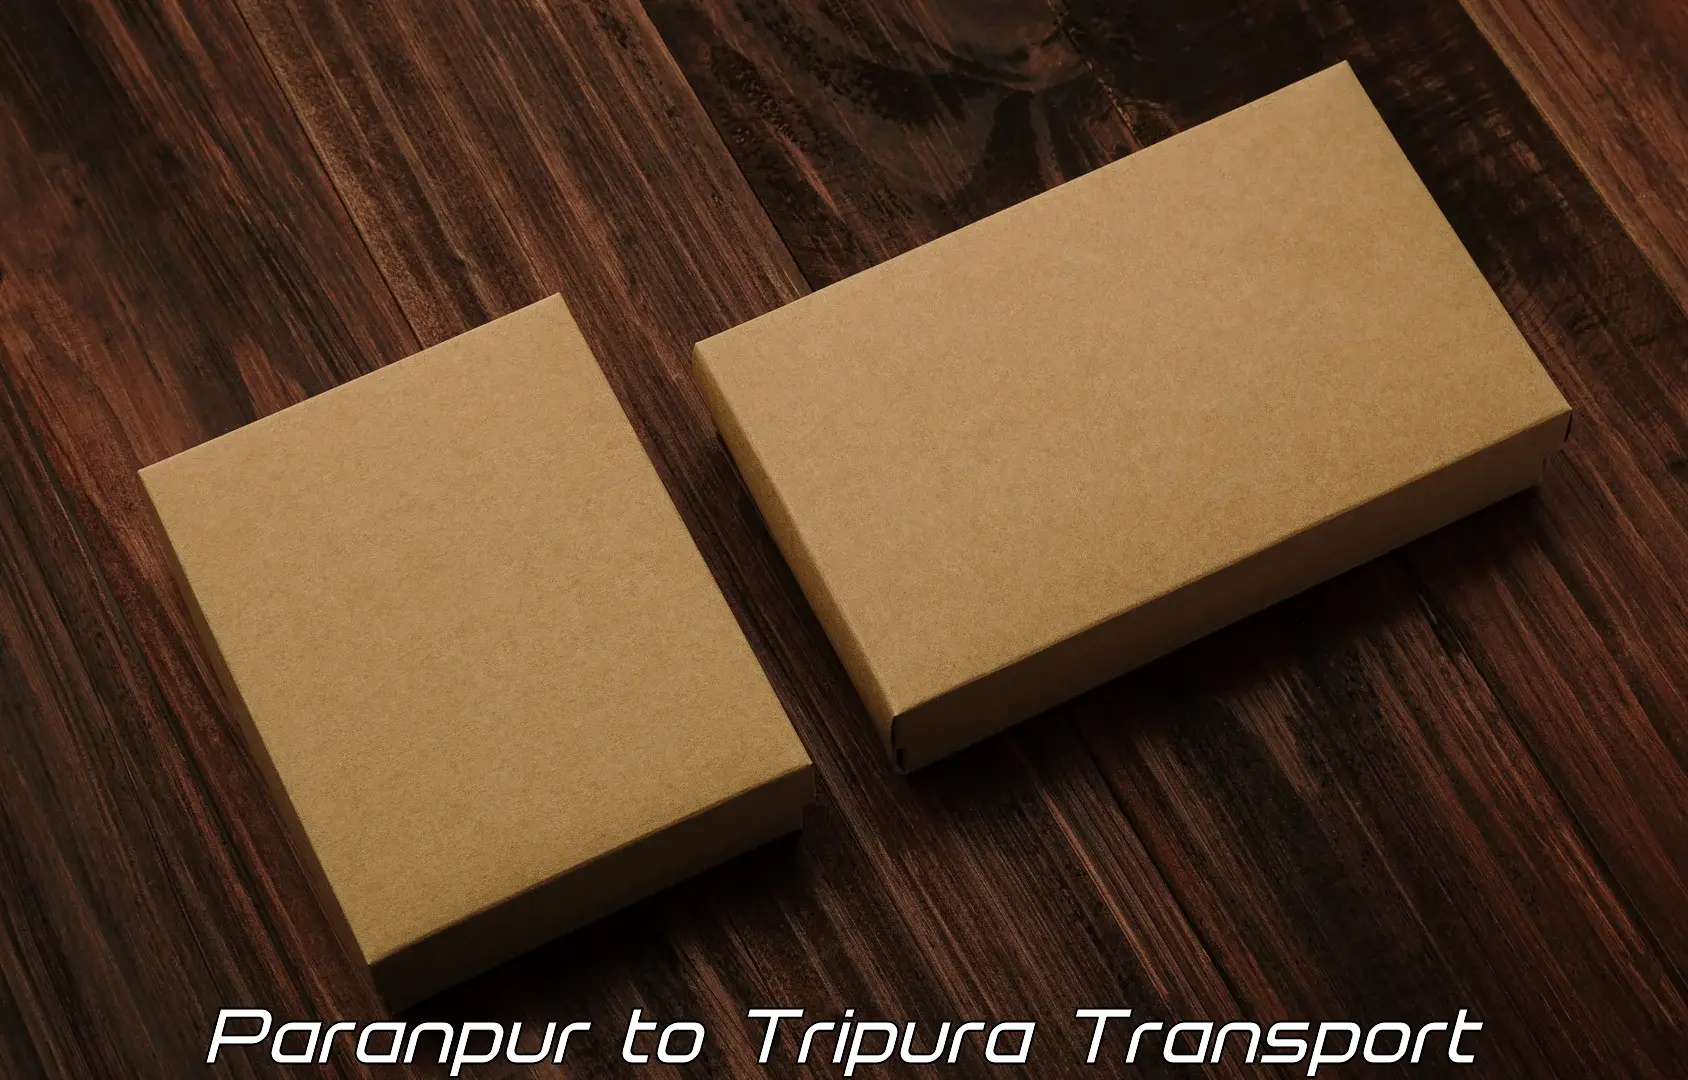 Domestic transport services Paranpur to Udaipur Tripura